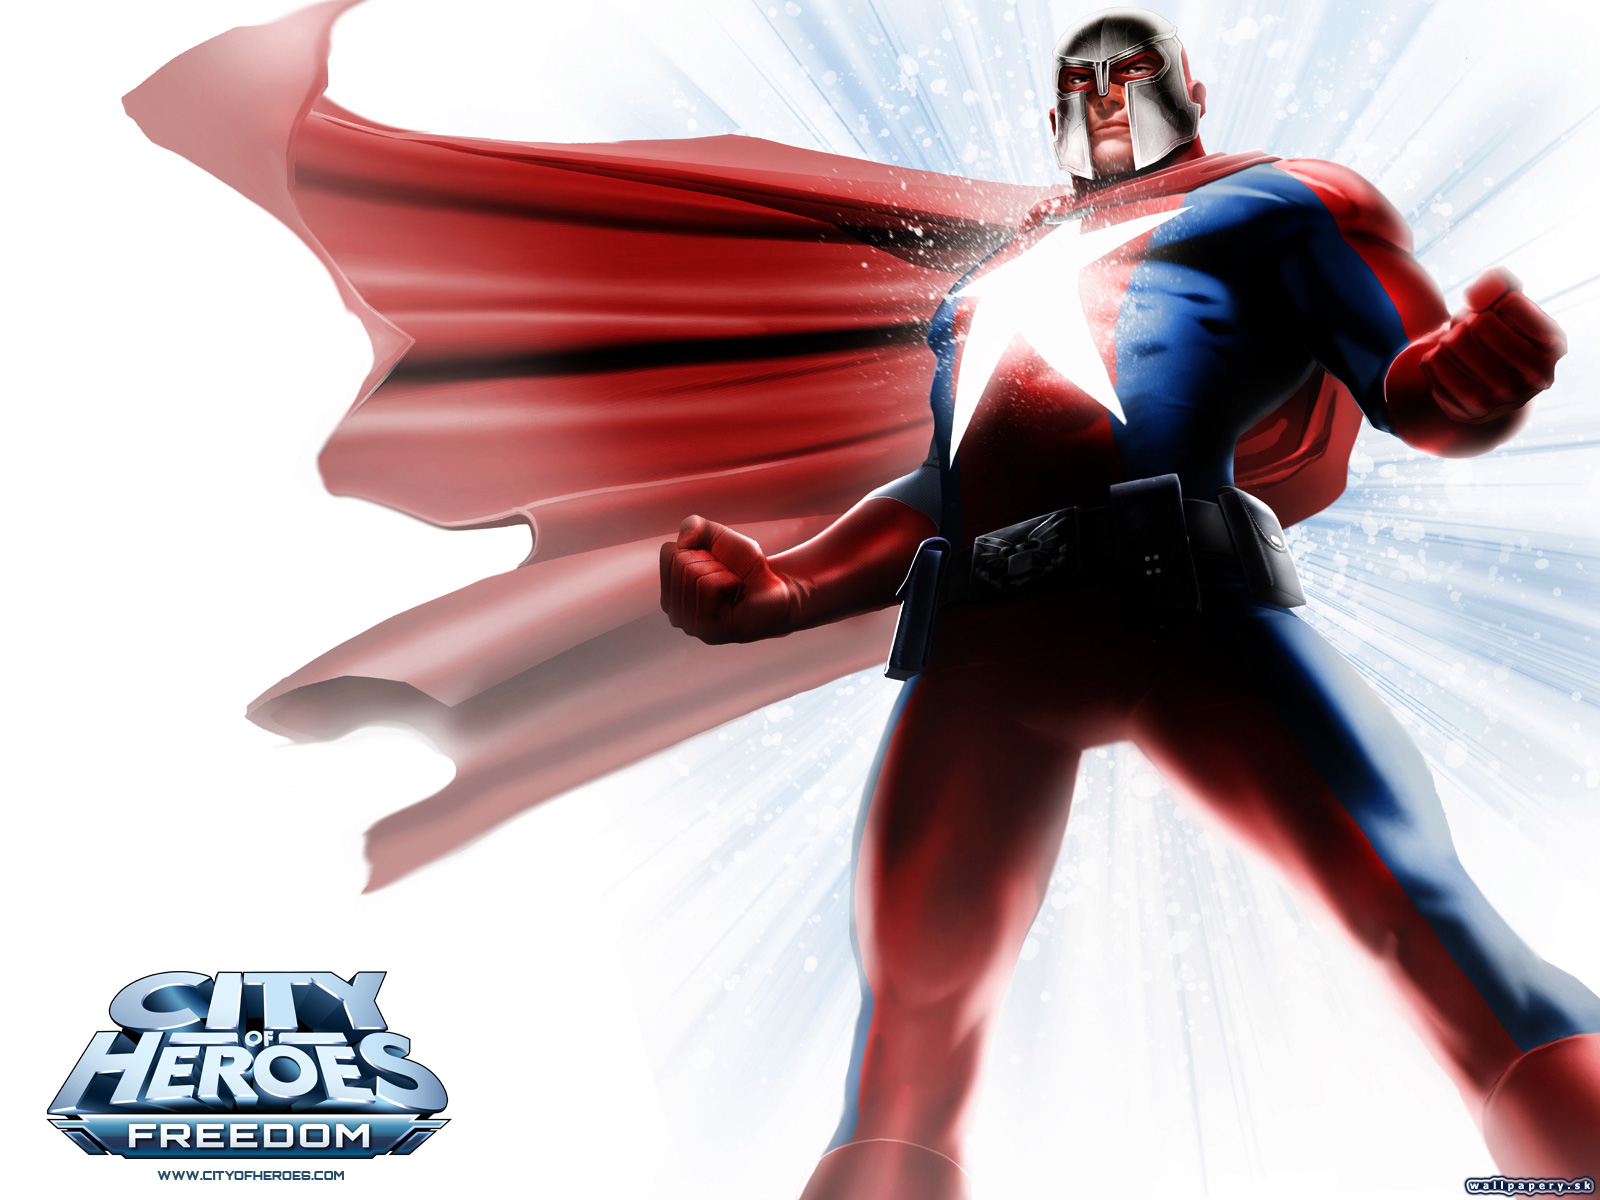 City of Heroes: Freedom - wallpaper 5